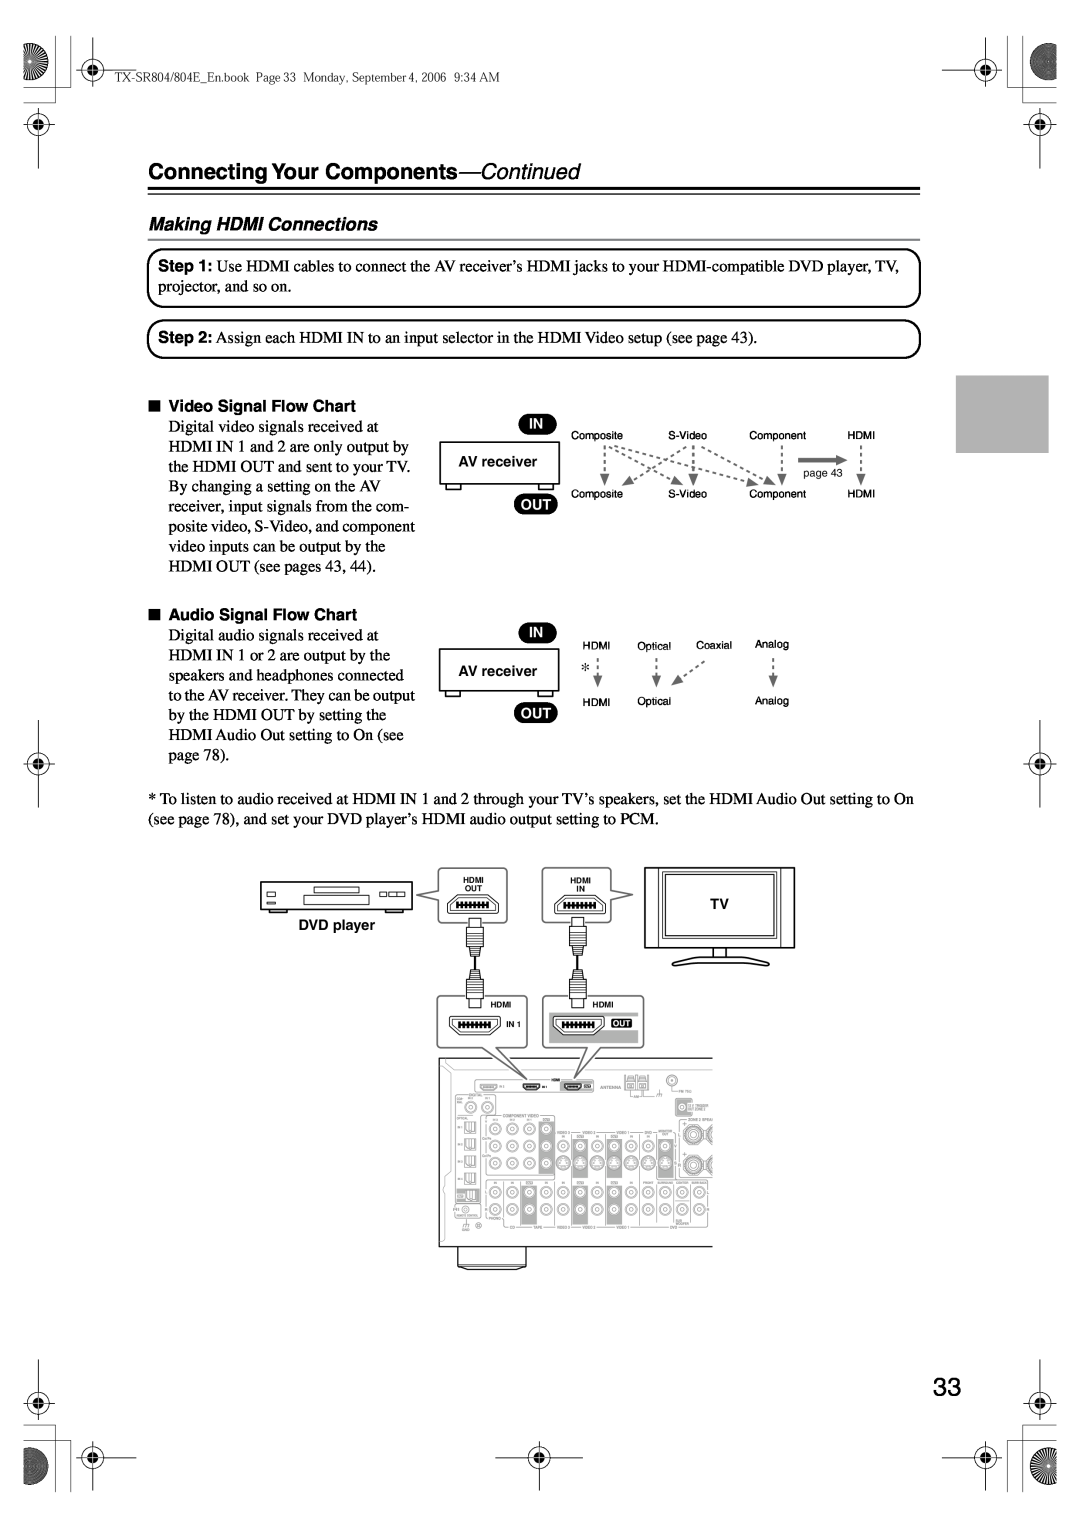 Onkyo TX-SR804E instruction manual Making HDMI Connections, Connecting Your Components—Continued, Video Signal Flow Chart 